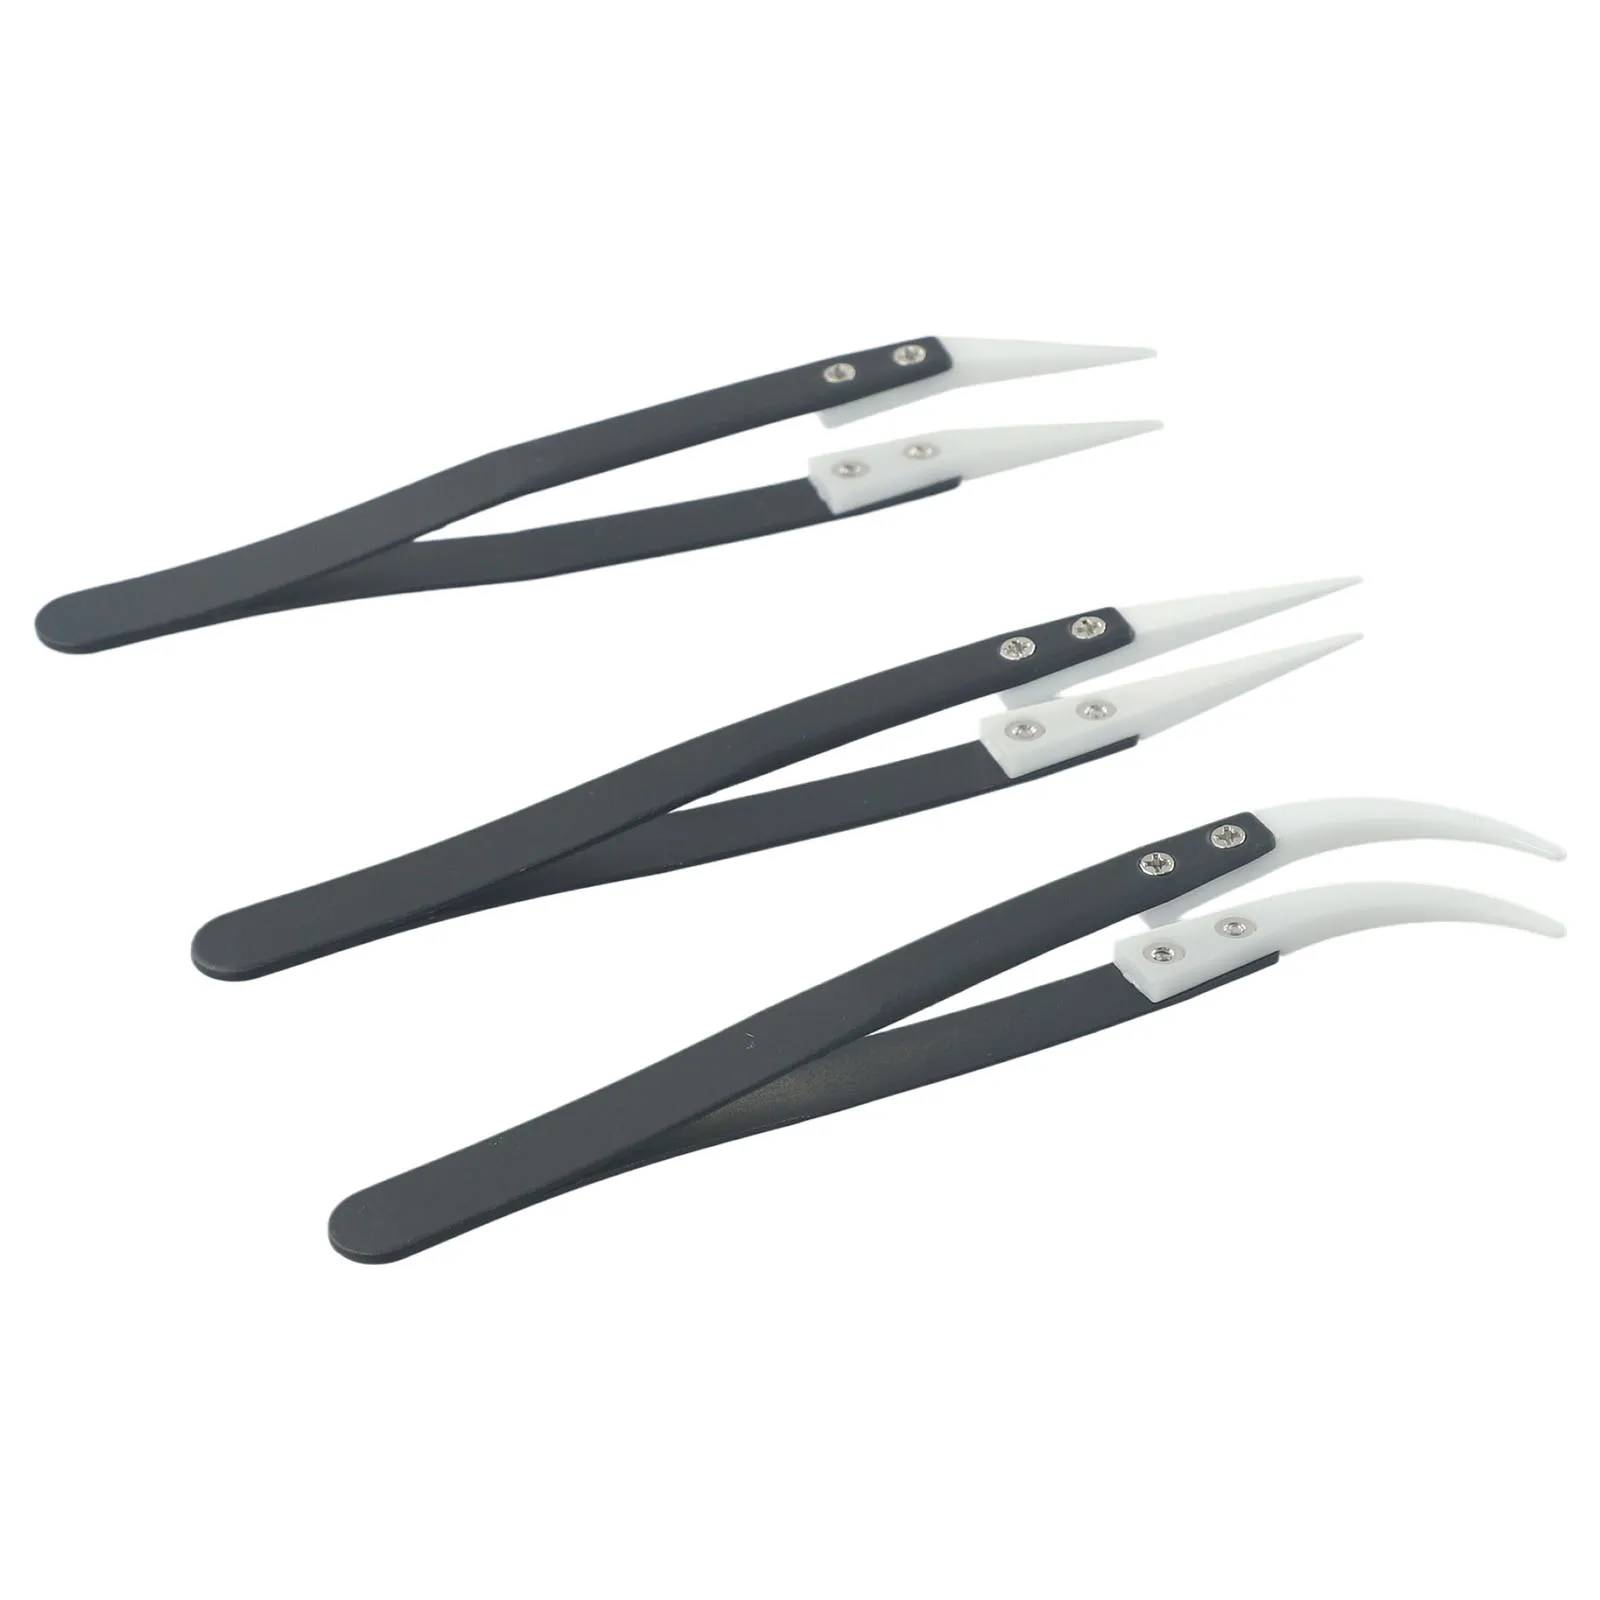 

3pcs Stainless Steel Ceramic Reverse Tweezers Little Curved/Big Curved/Straight Tweezer Non-Conductive Heat Resistant Hand Tools